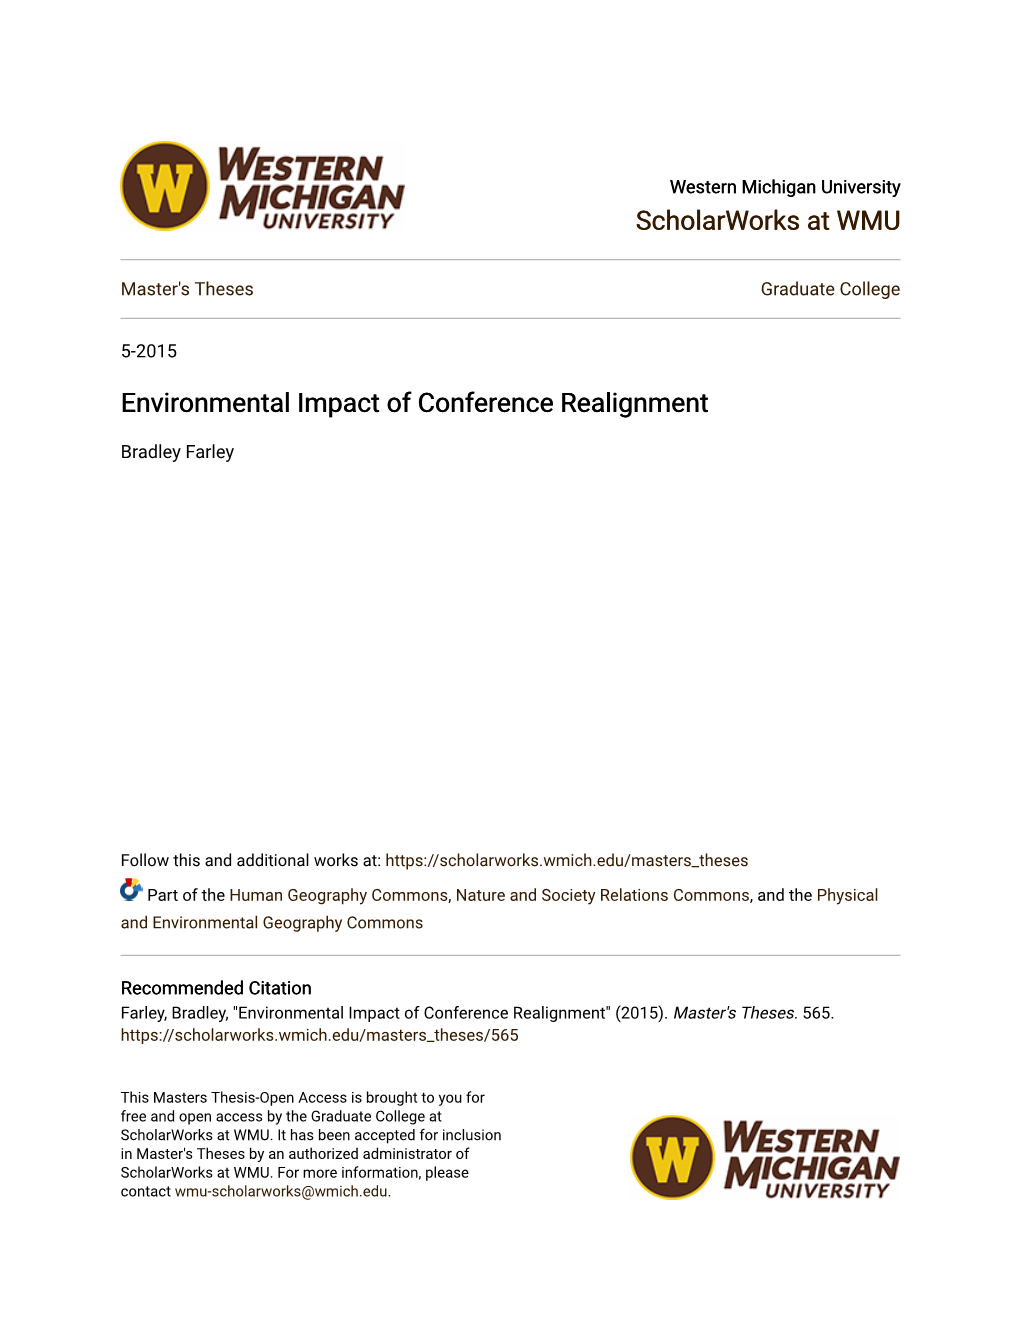 Environmental Impact of Conference Realignment